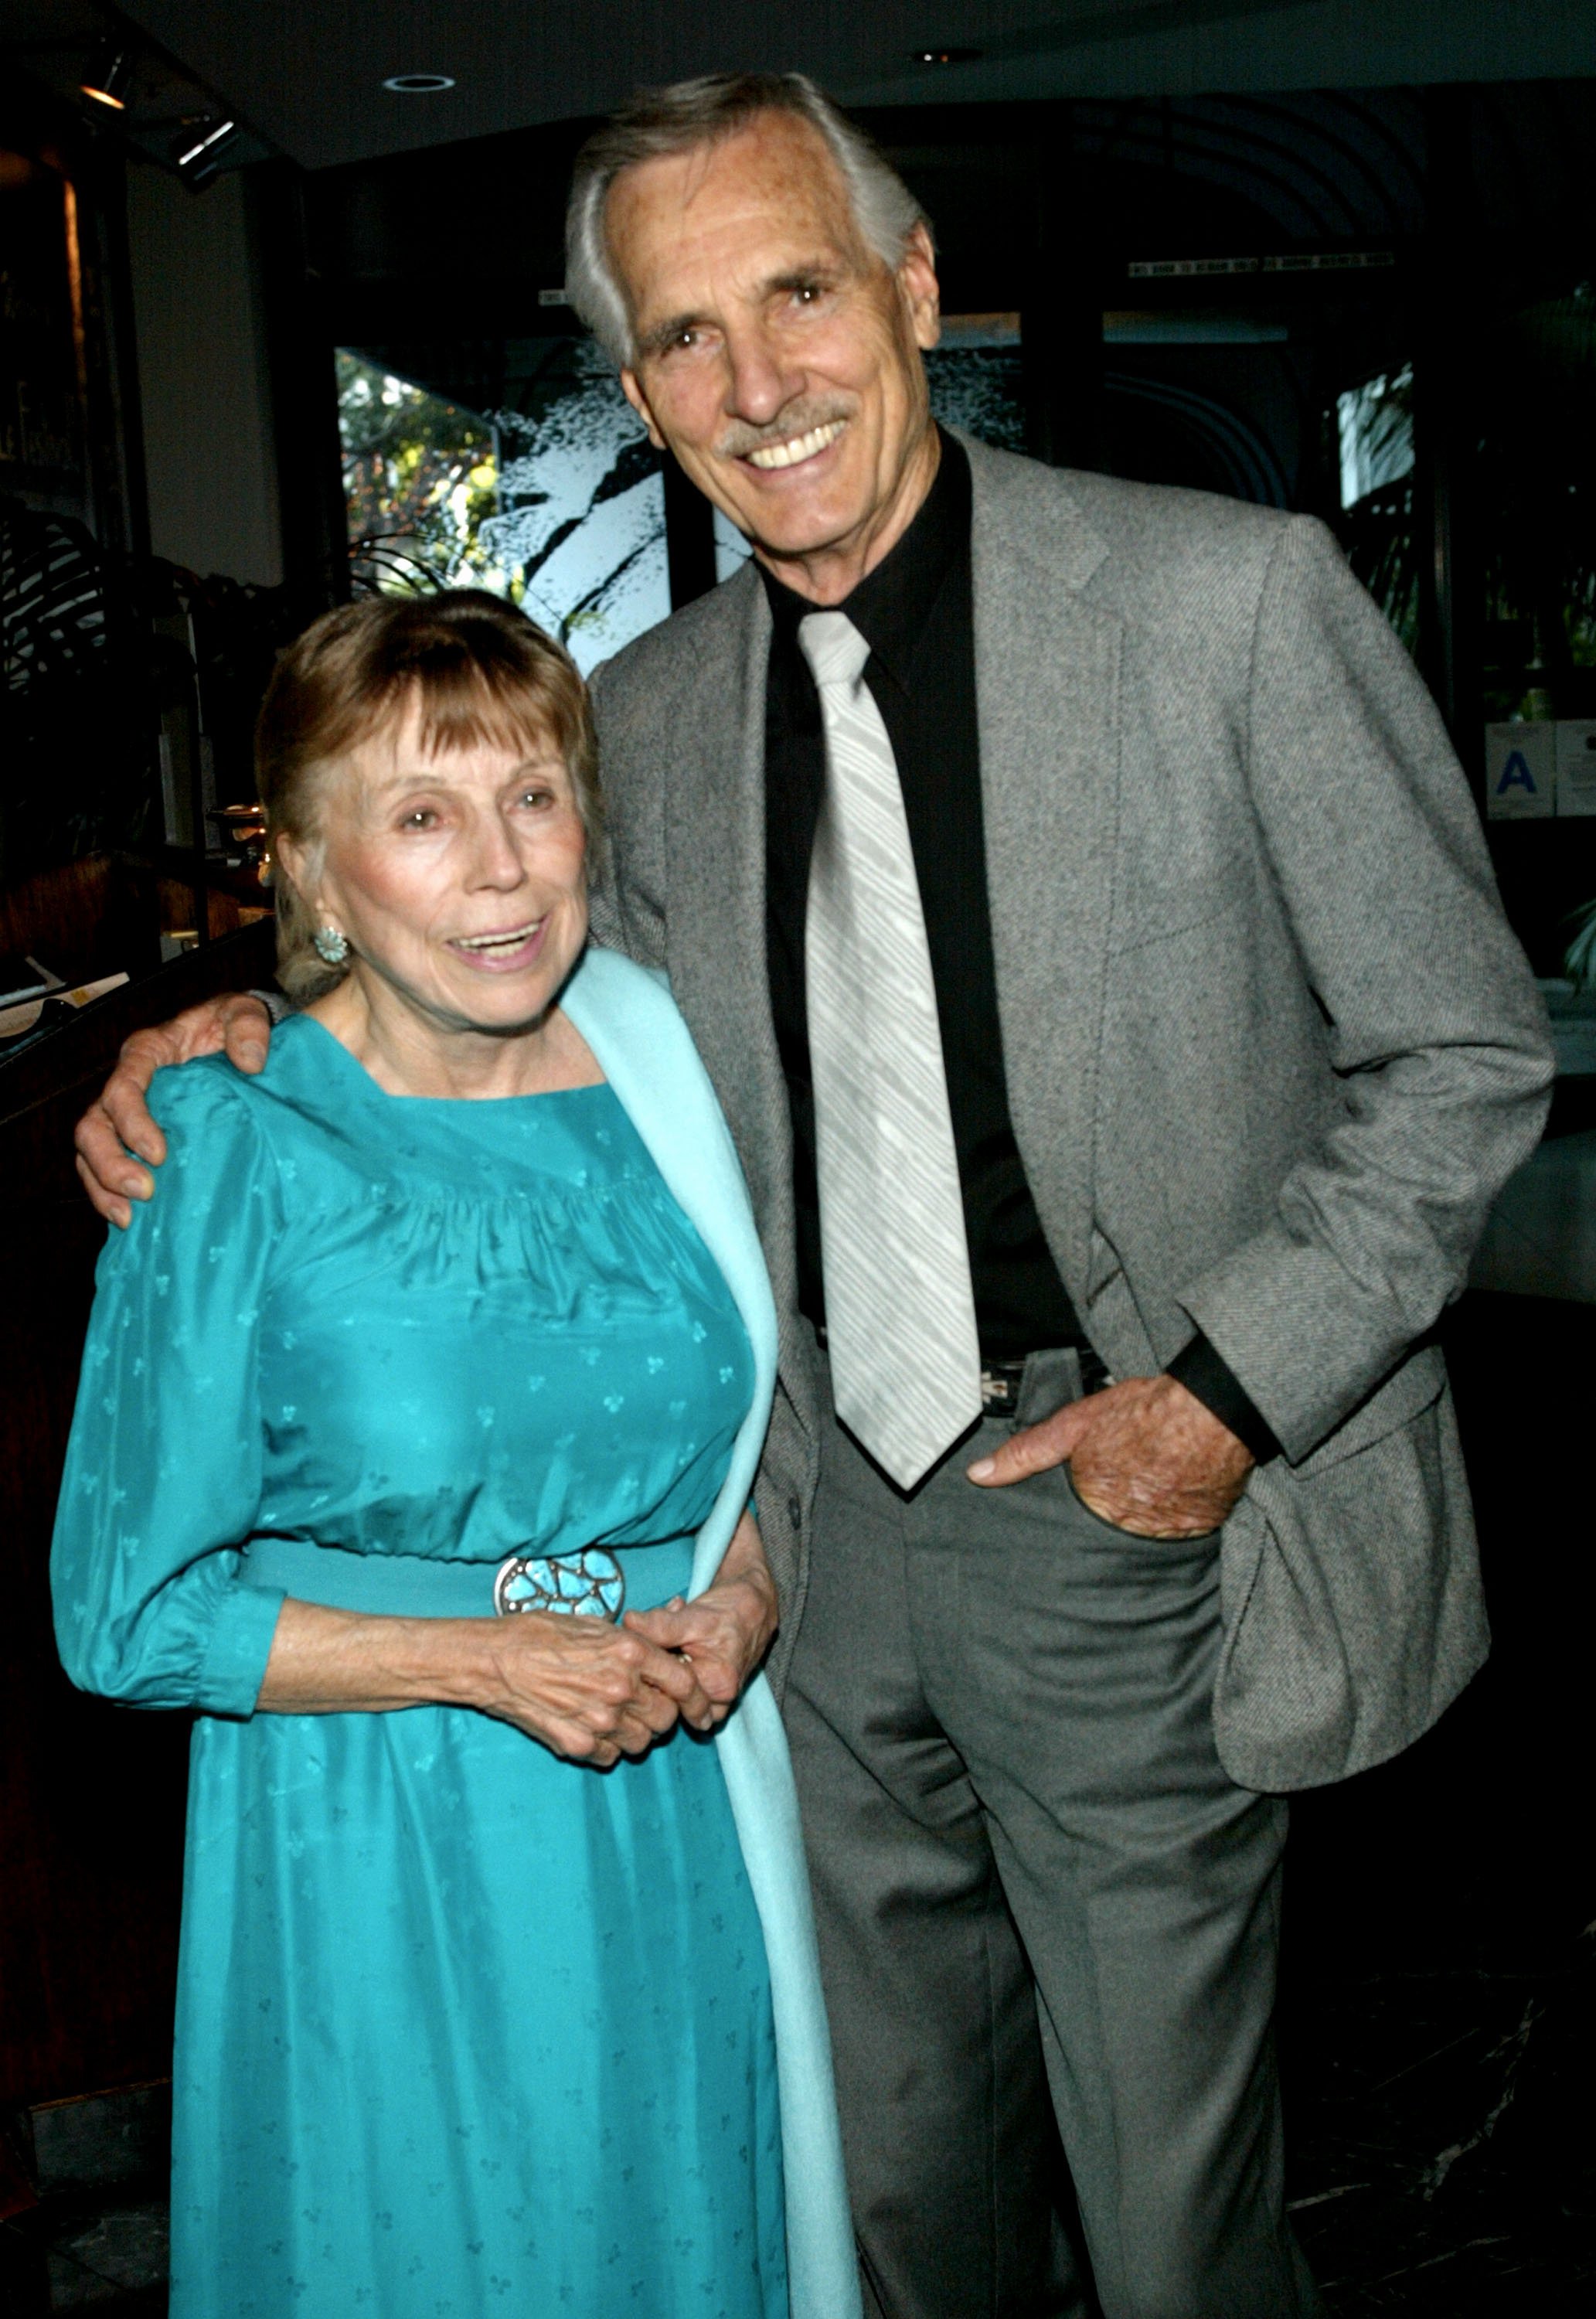 Dennis Weaver and his Gerry Stowell attend the 44th Annual Los Angeles Press Club Southern California Journalism Awards on June 22, 2002 in Beverly Hills, California. / Source: Getty Images